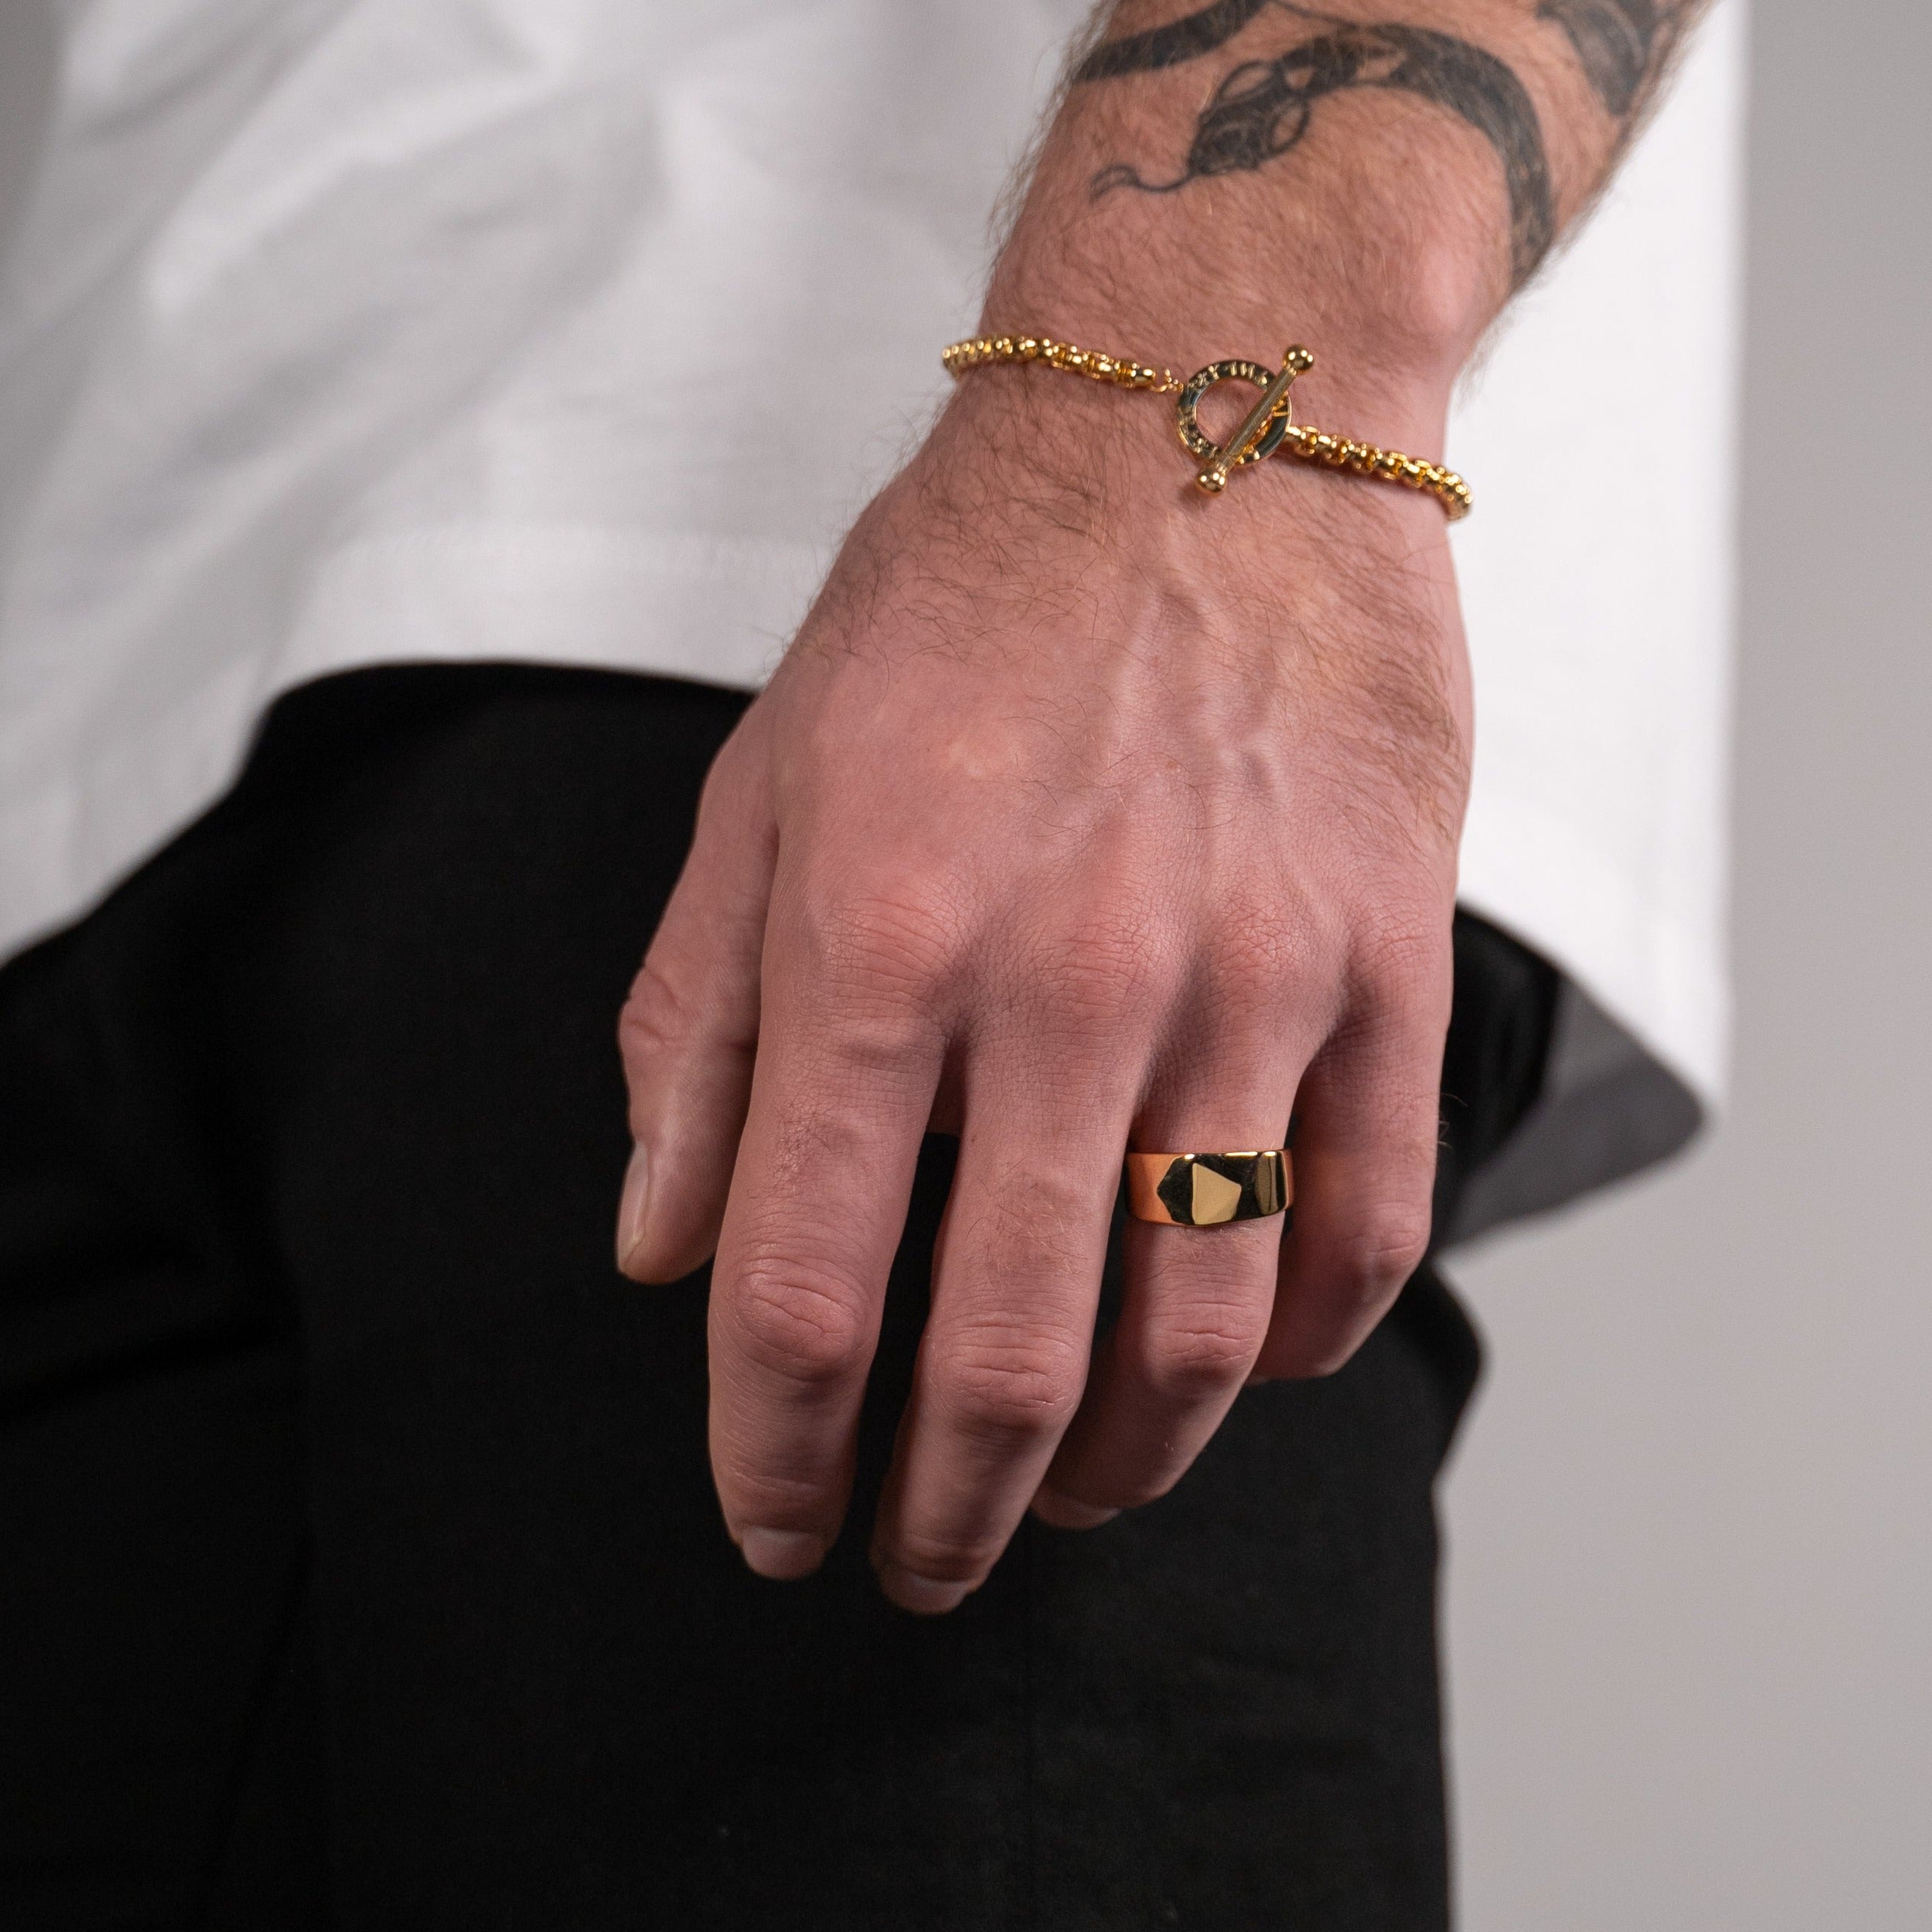 Kant Signature ring - Gold-toned